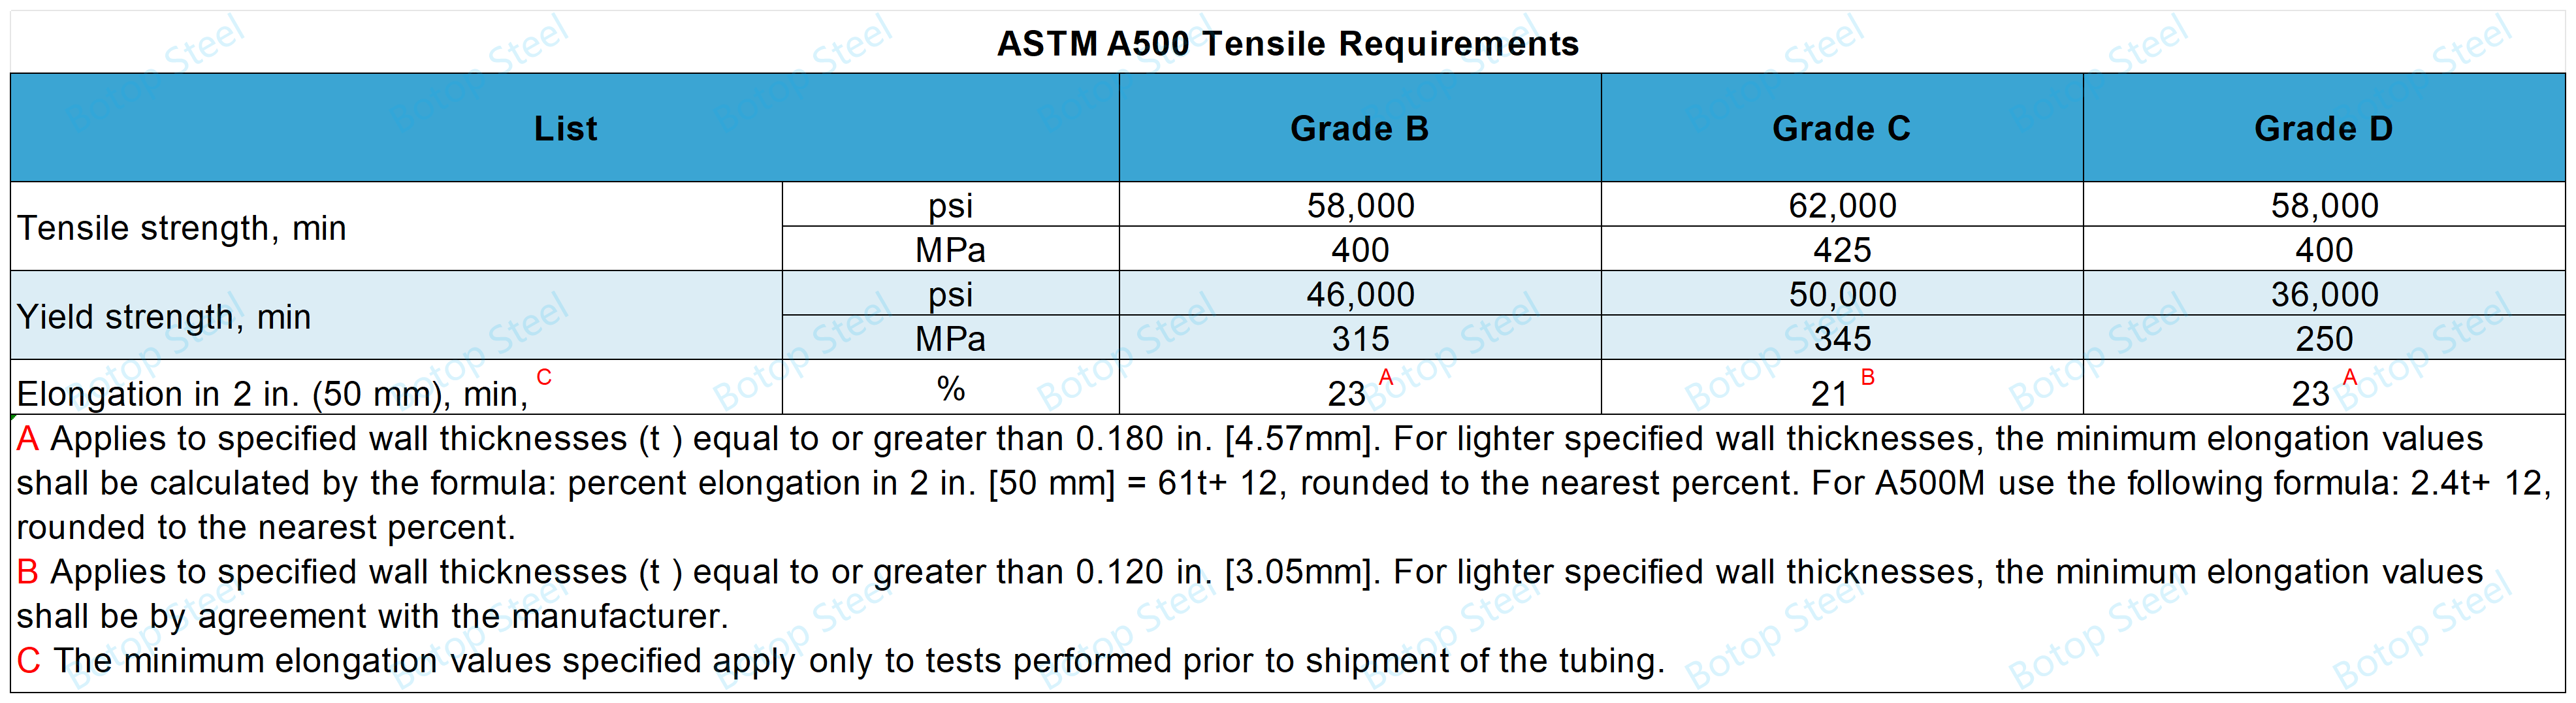 ASTM A500 Tensile Requirements